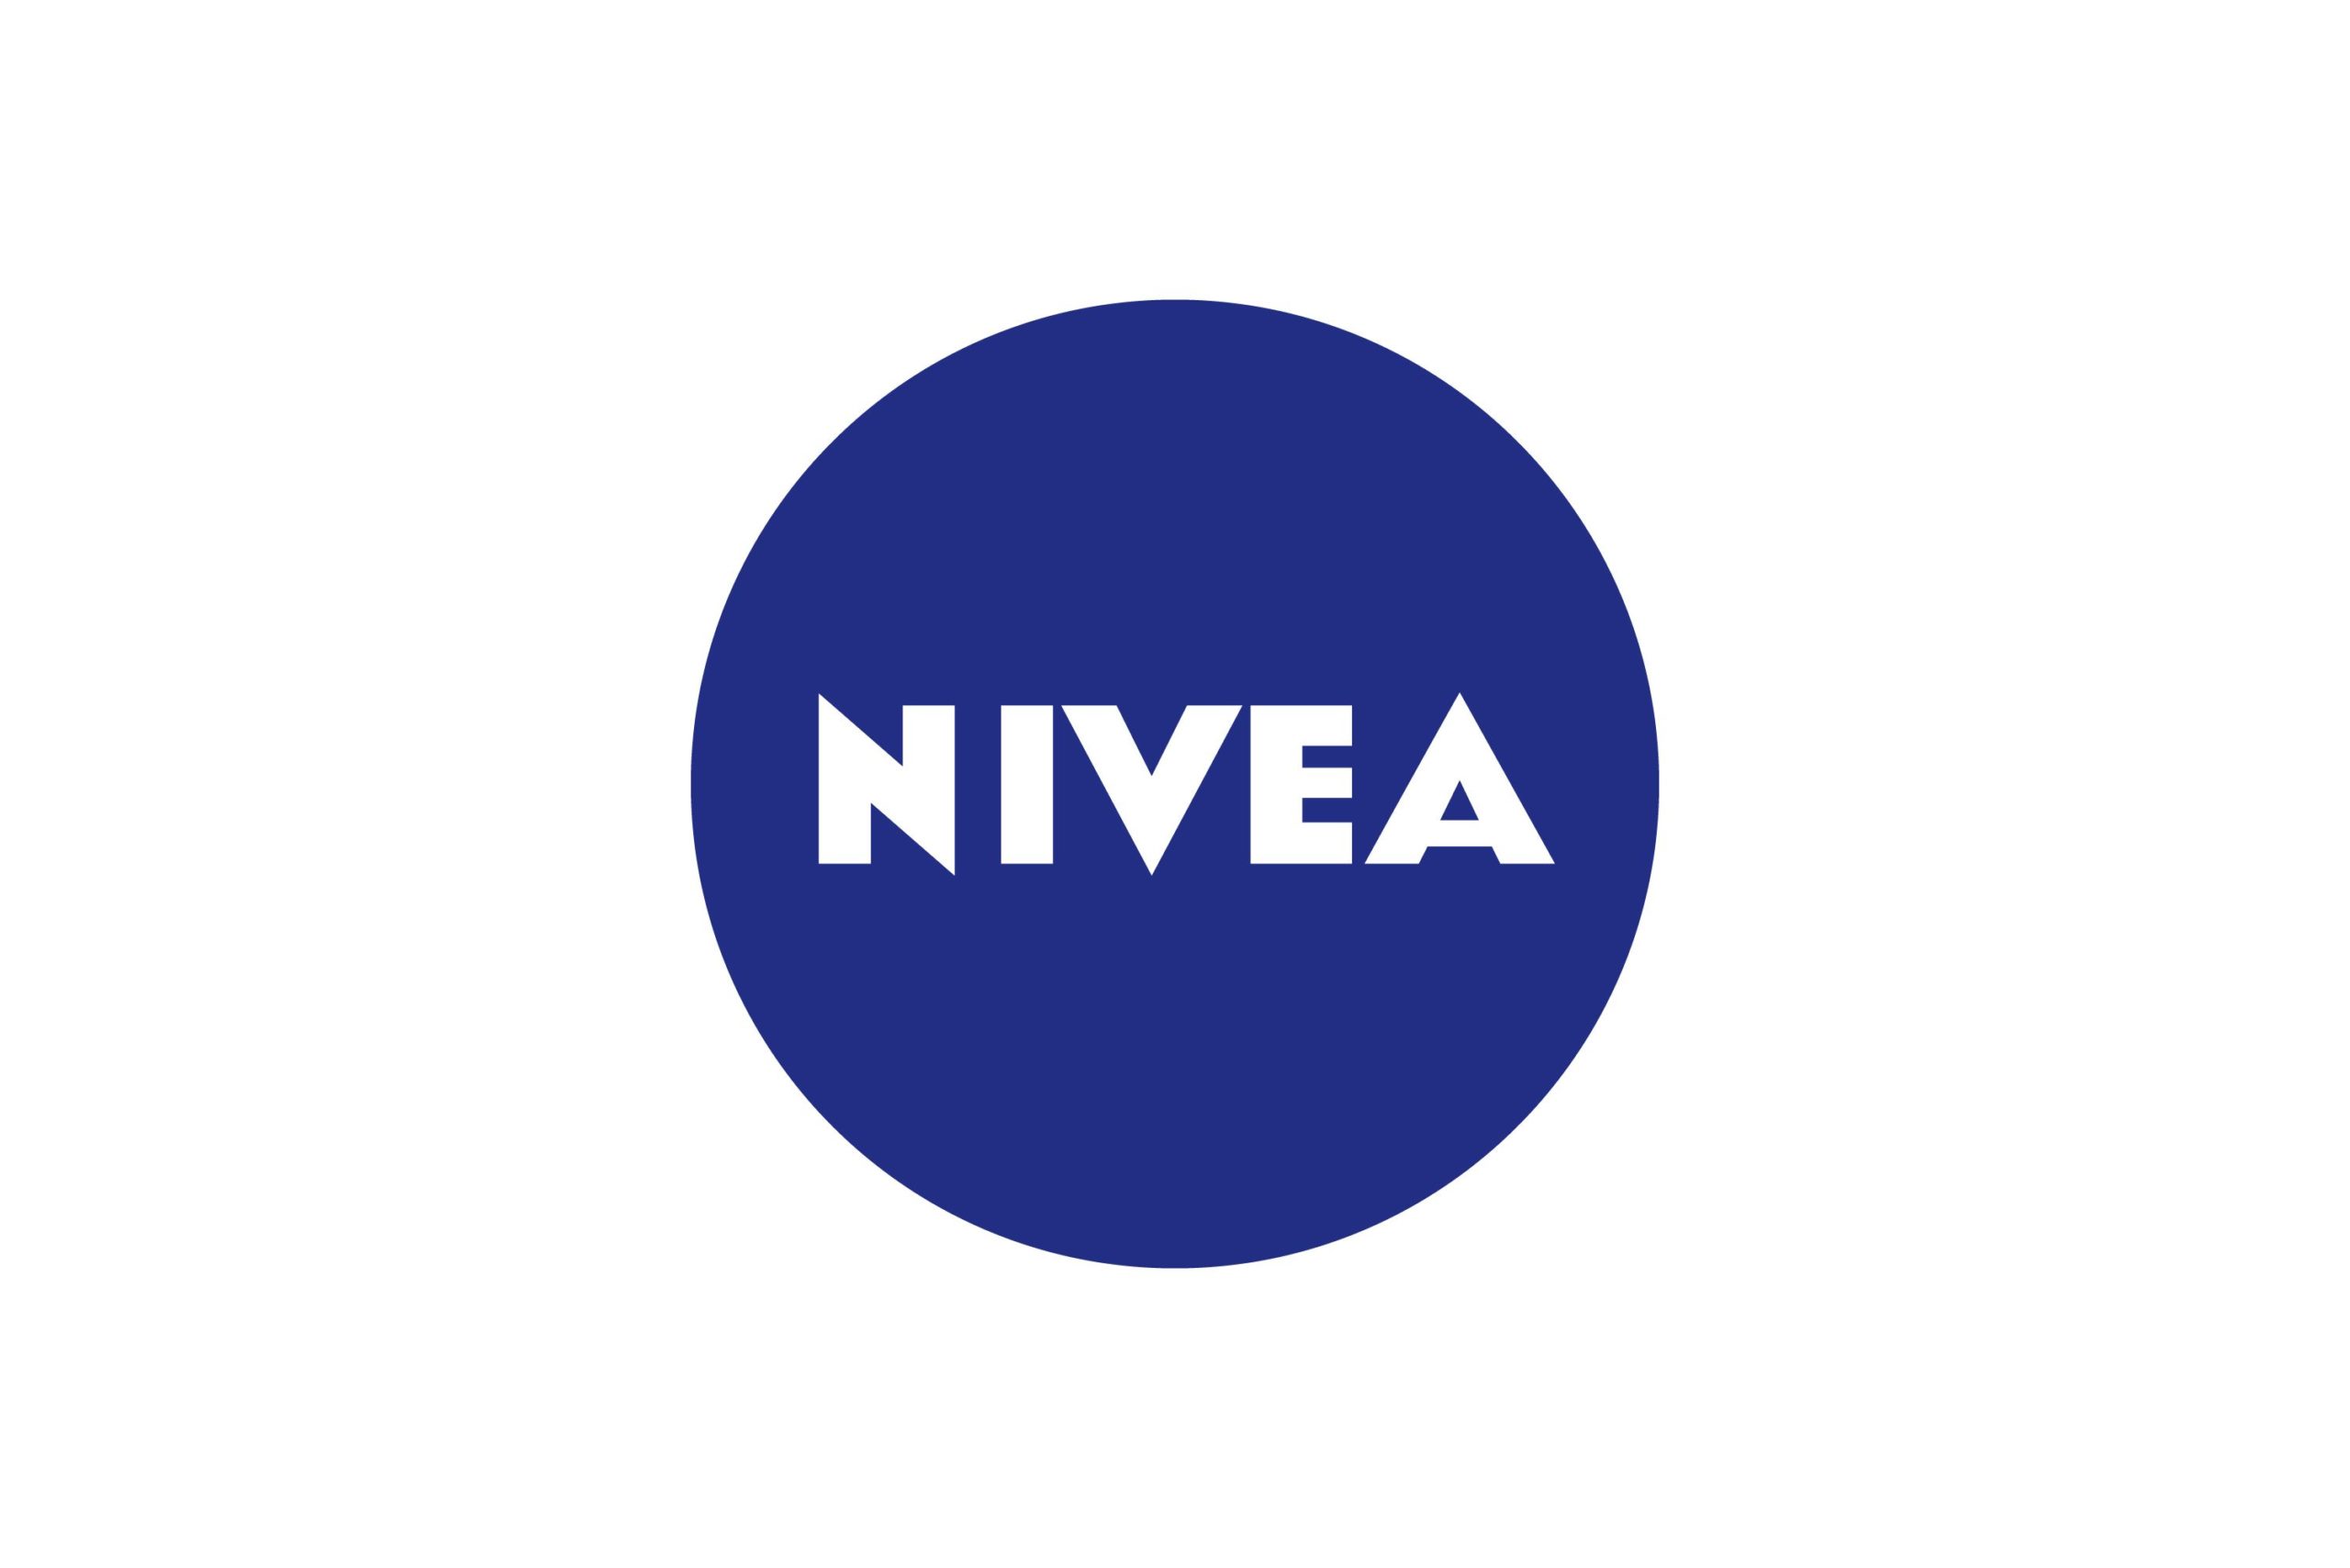 NIVEA partners up with E-commerce platforms in Bangladesh